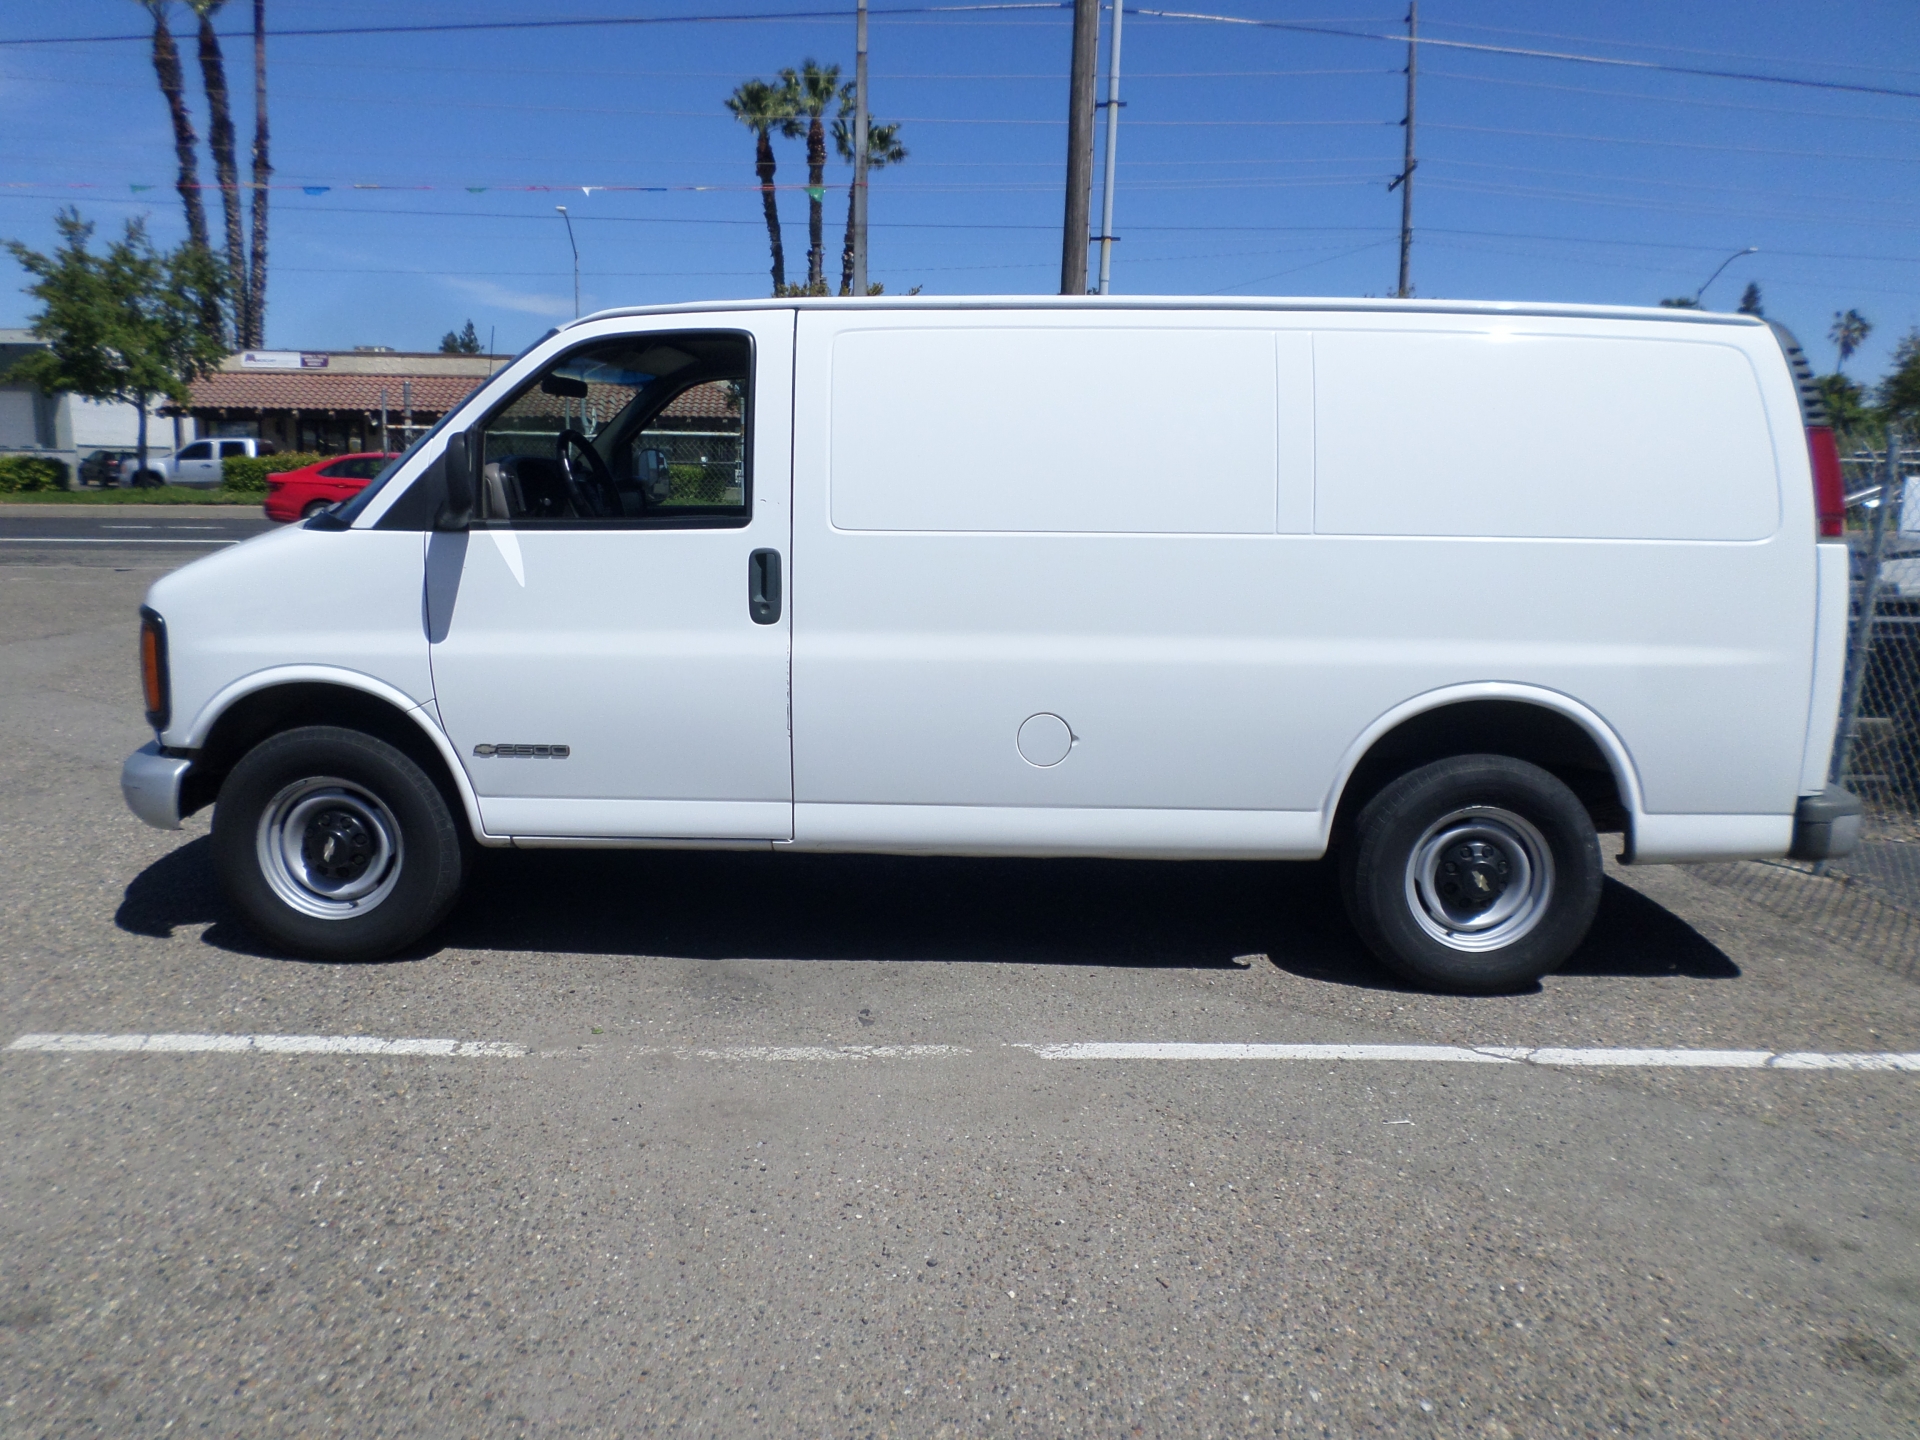 Commercial equipment for sale: 2001 Chevrolet Cargo Express Van 2500 in  Lodi Stockton CA - Lodi Park and Sell